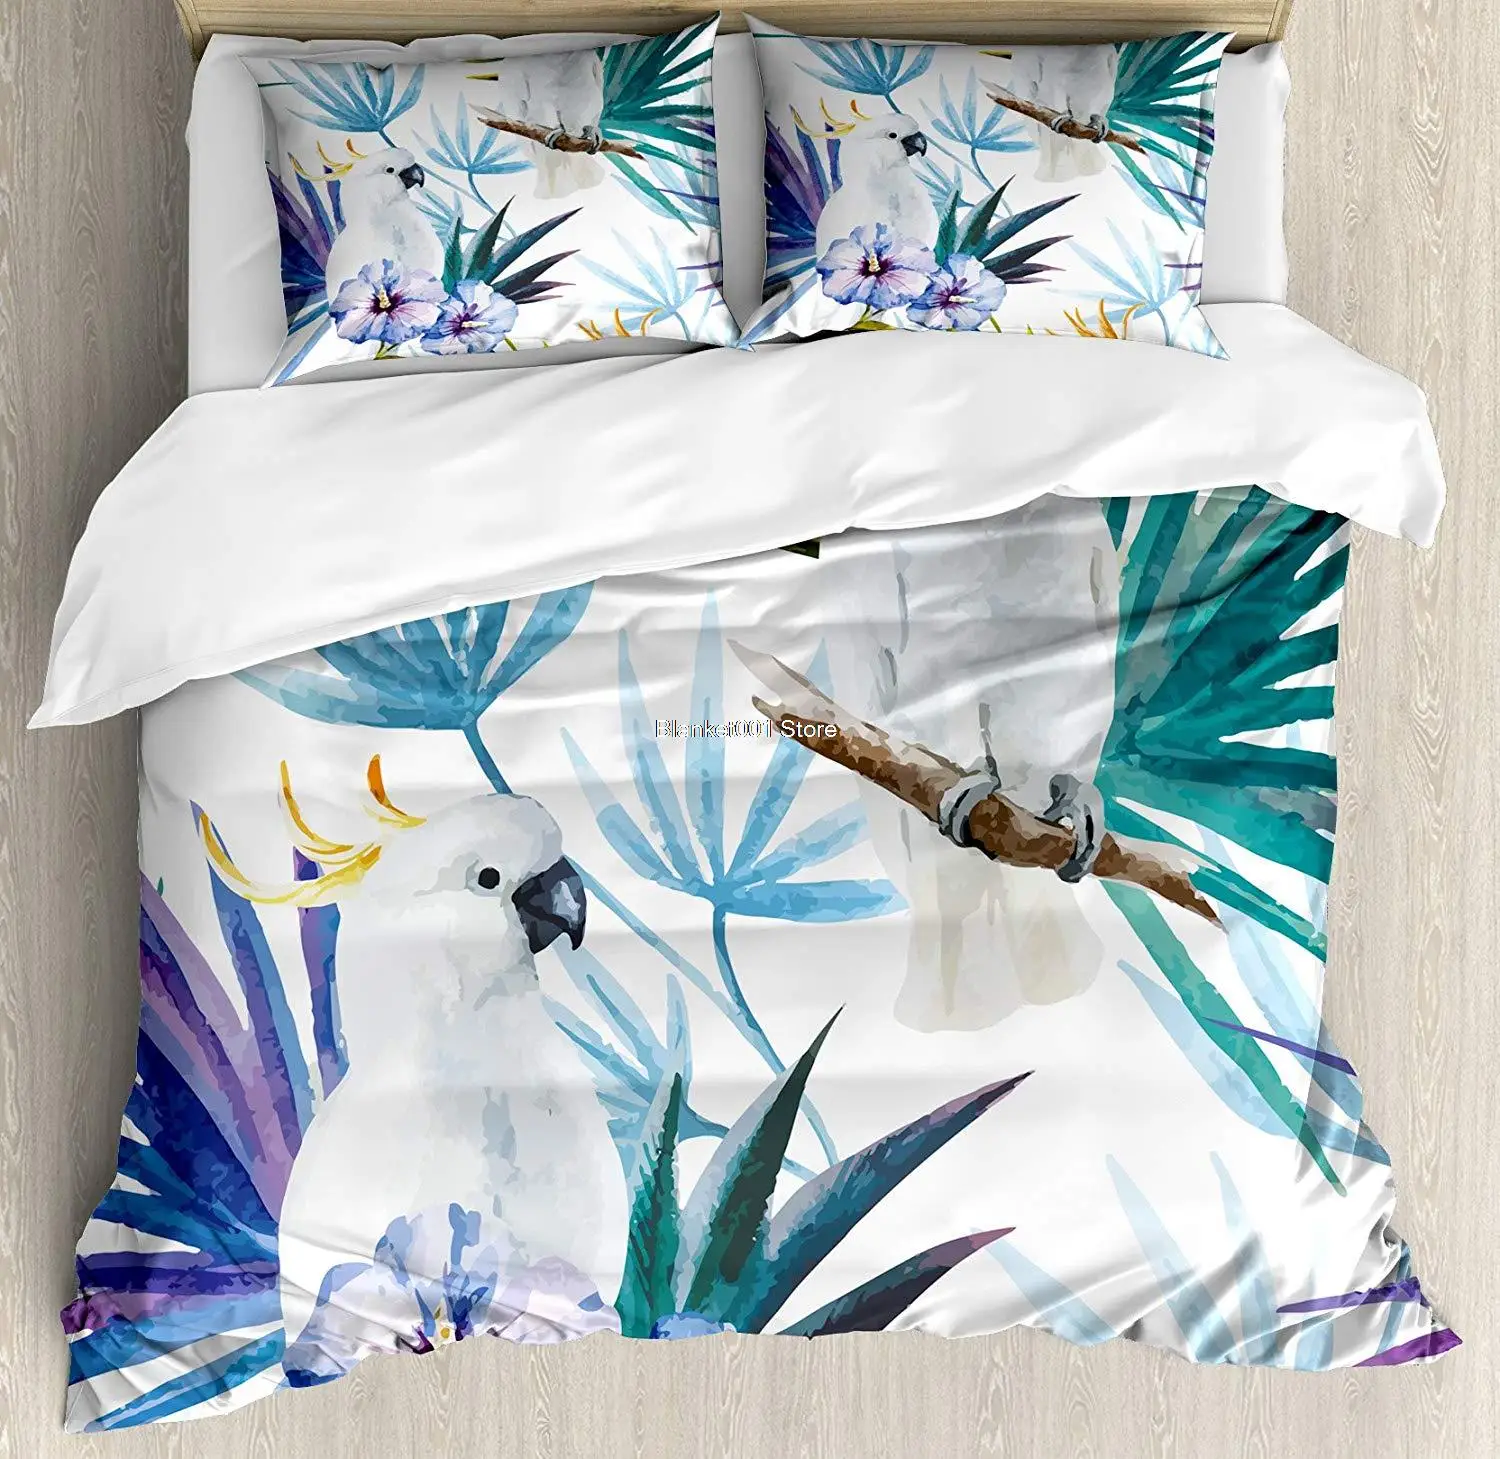 

Tropical Duvet Cover Set Watercolor White Parrot Birds on Palm Tree Branches Leaves Exotic Nature Artwork Decorative 3 Piece Bed